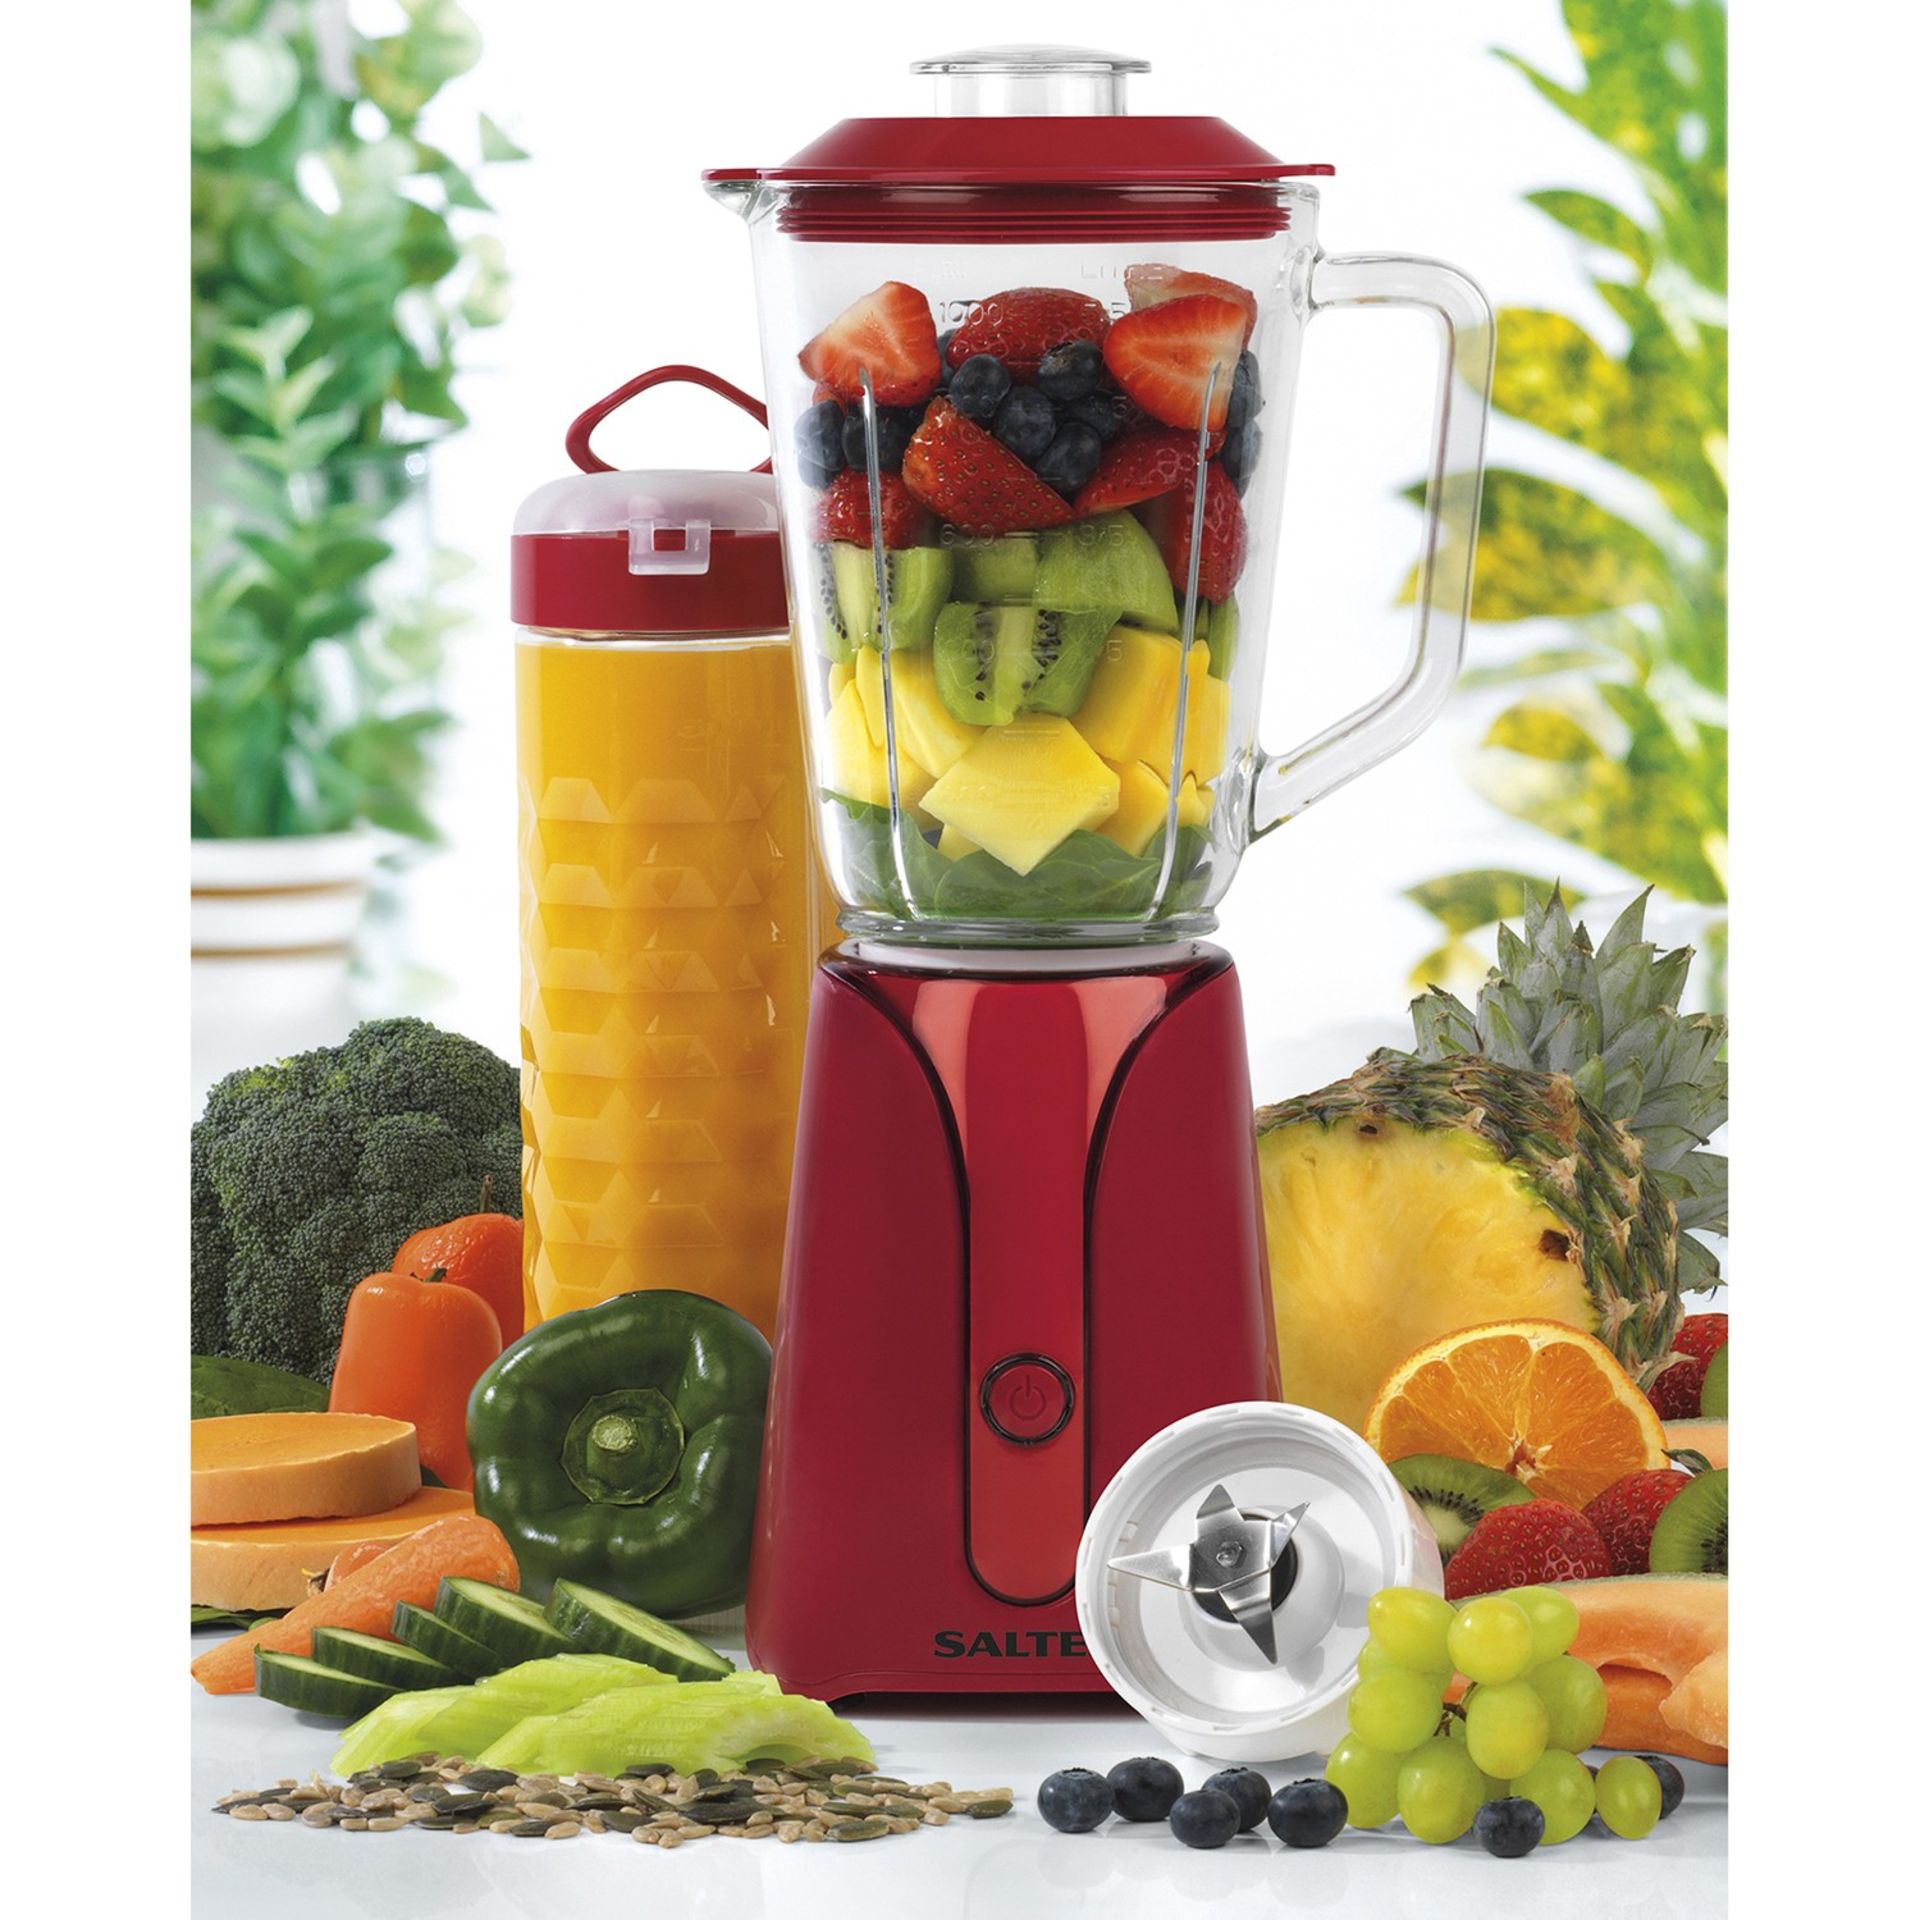 V *TRADE QTY* Brand New Salter 2 In 1 To Go Blender Set With Stainless Steel Crossblade Attachment- - Image 2 of 2